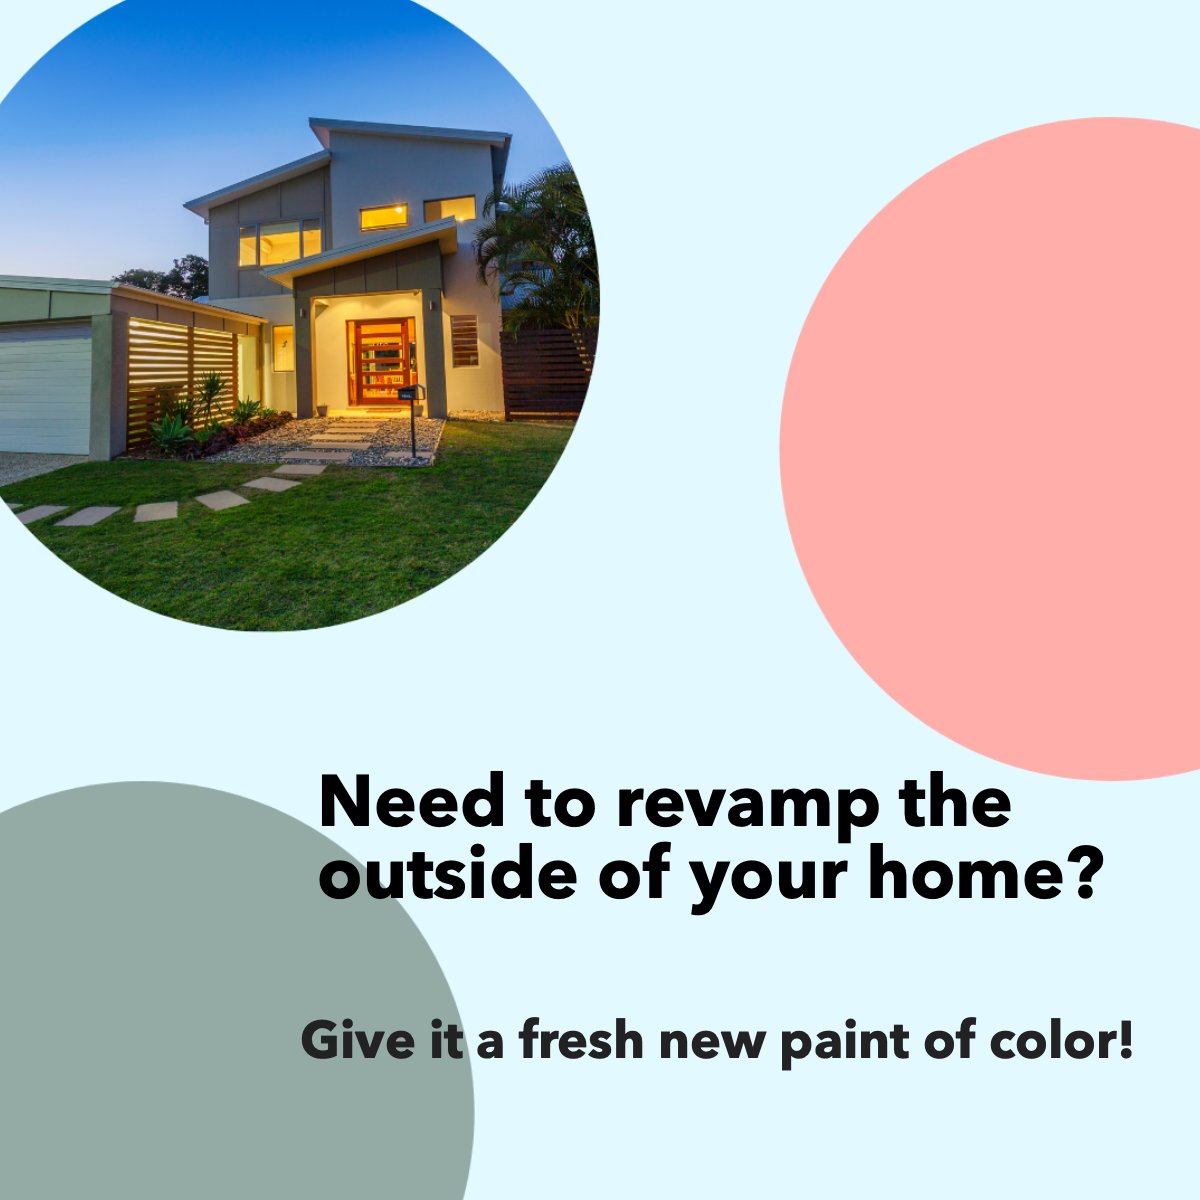 Need to revamp the outside of your home? 🎨

An exterior makeover can maximize curb appeal and give your home a whole new look. 😎

#paintingideas #paint #revamp
 #MVPRealty #Jayneyardenrealtor #Gulfcoastrealestate #Tampabayrealestate #floridarealestateforsale